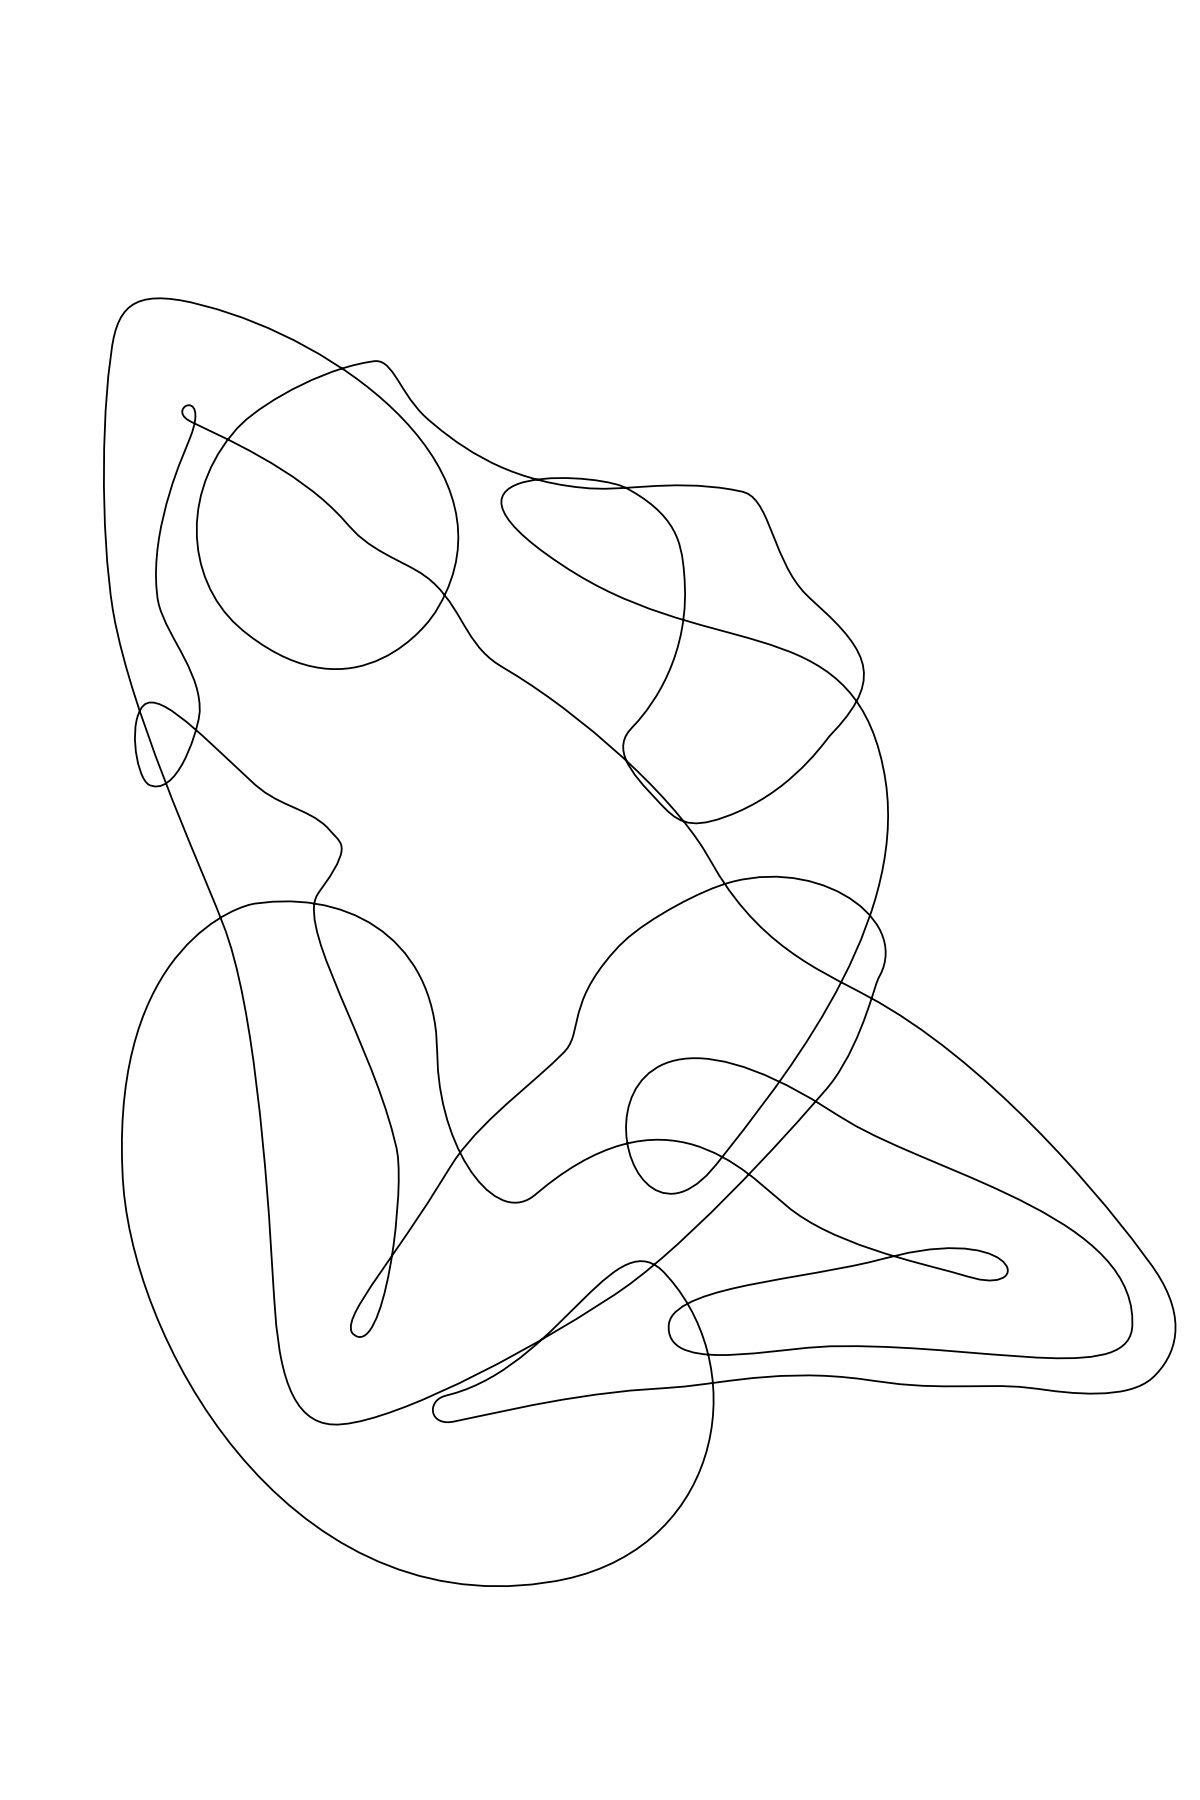 In One Line A Graphic String Theory on Behance